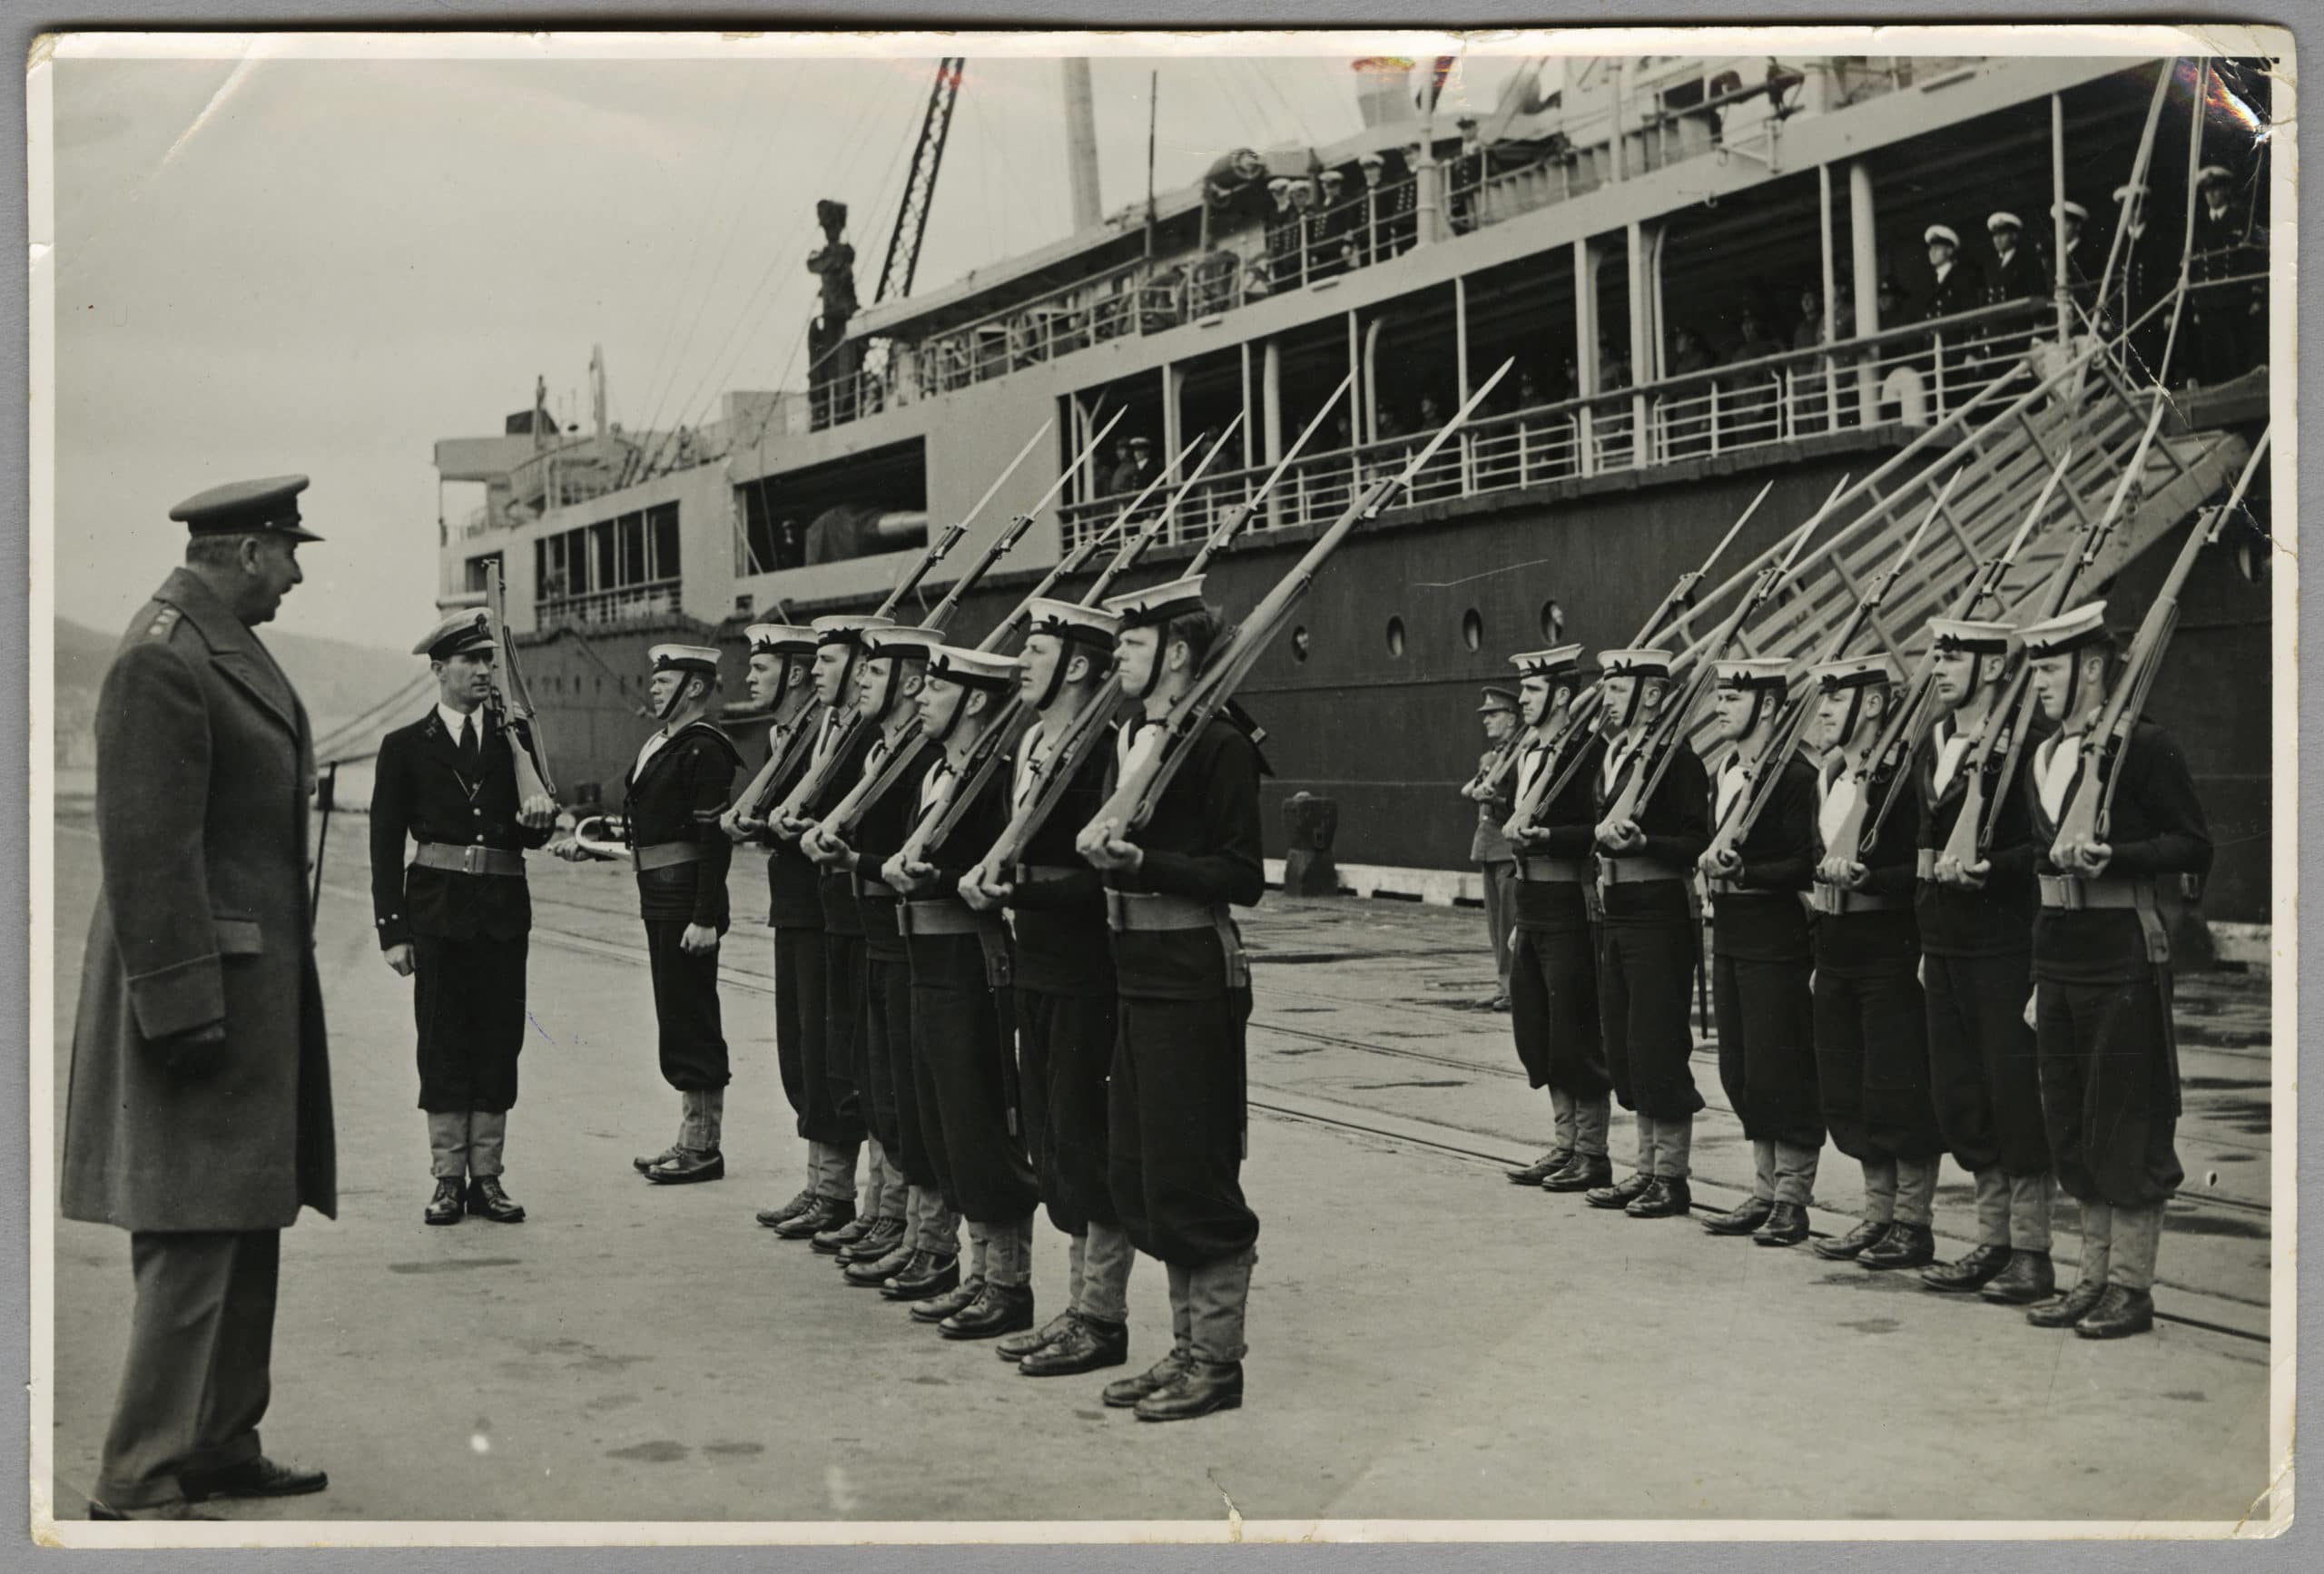 Sailors on the wharf in front of HMS Monowai 1941